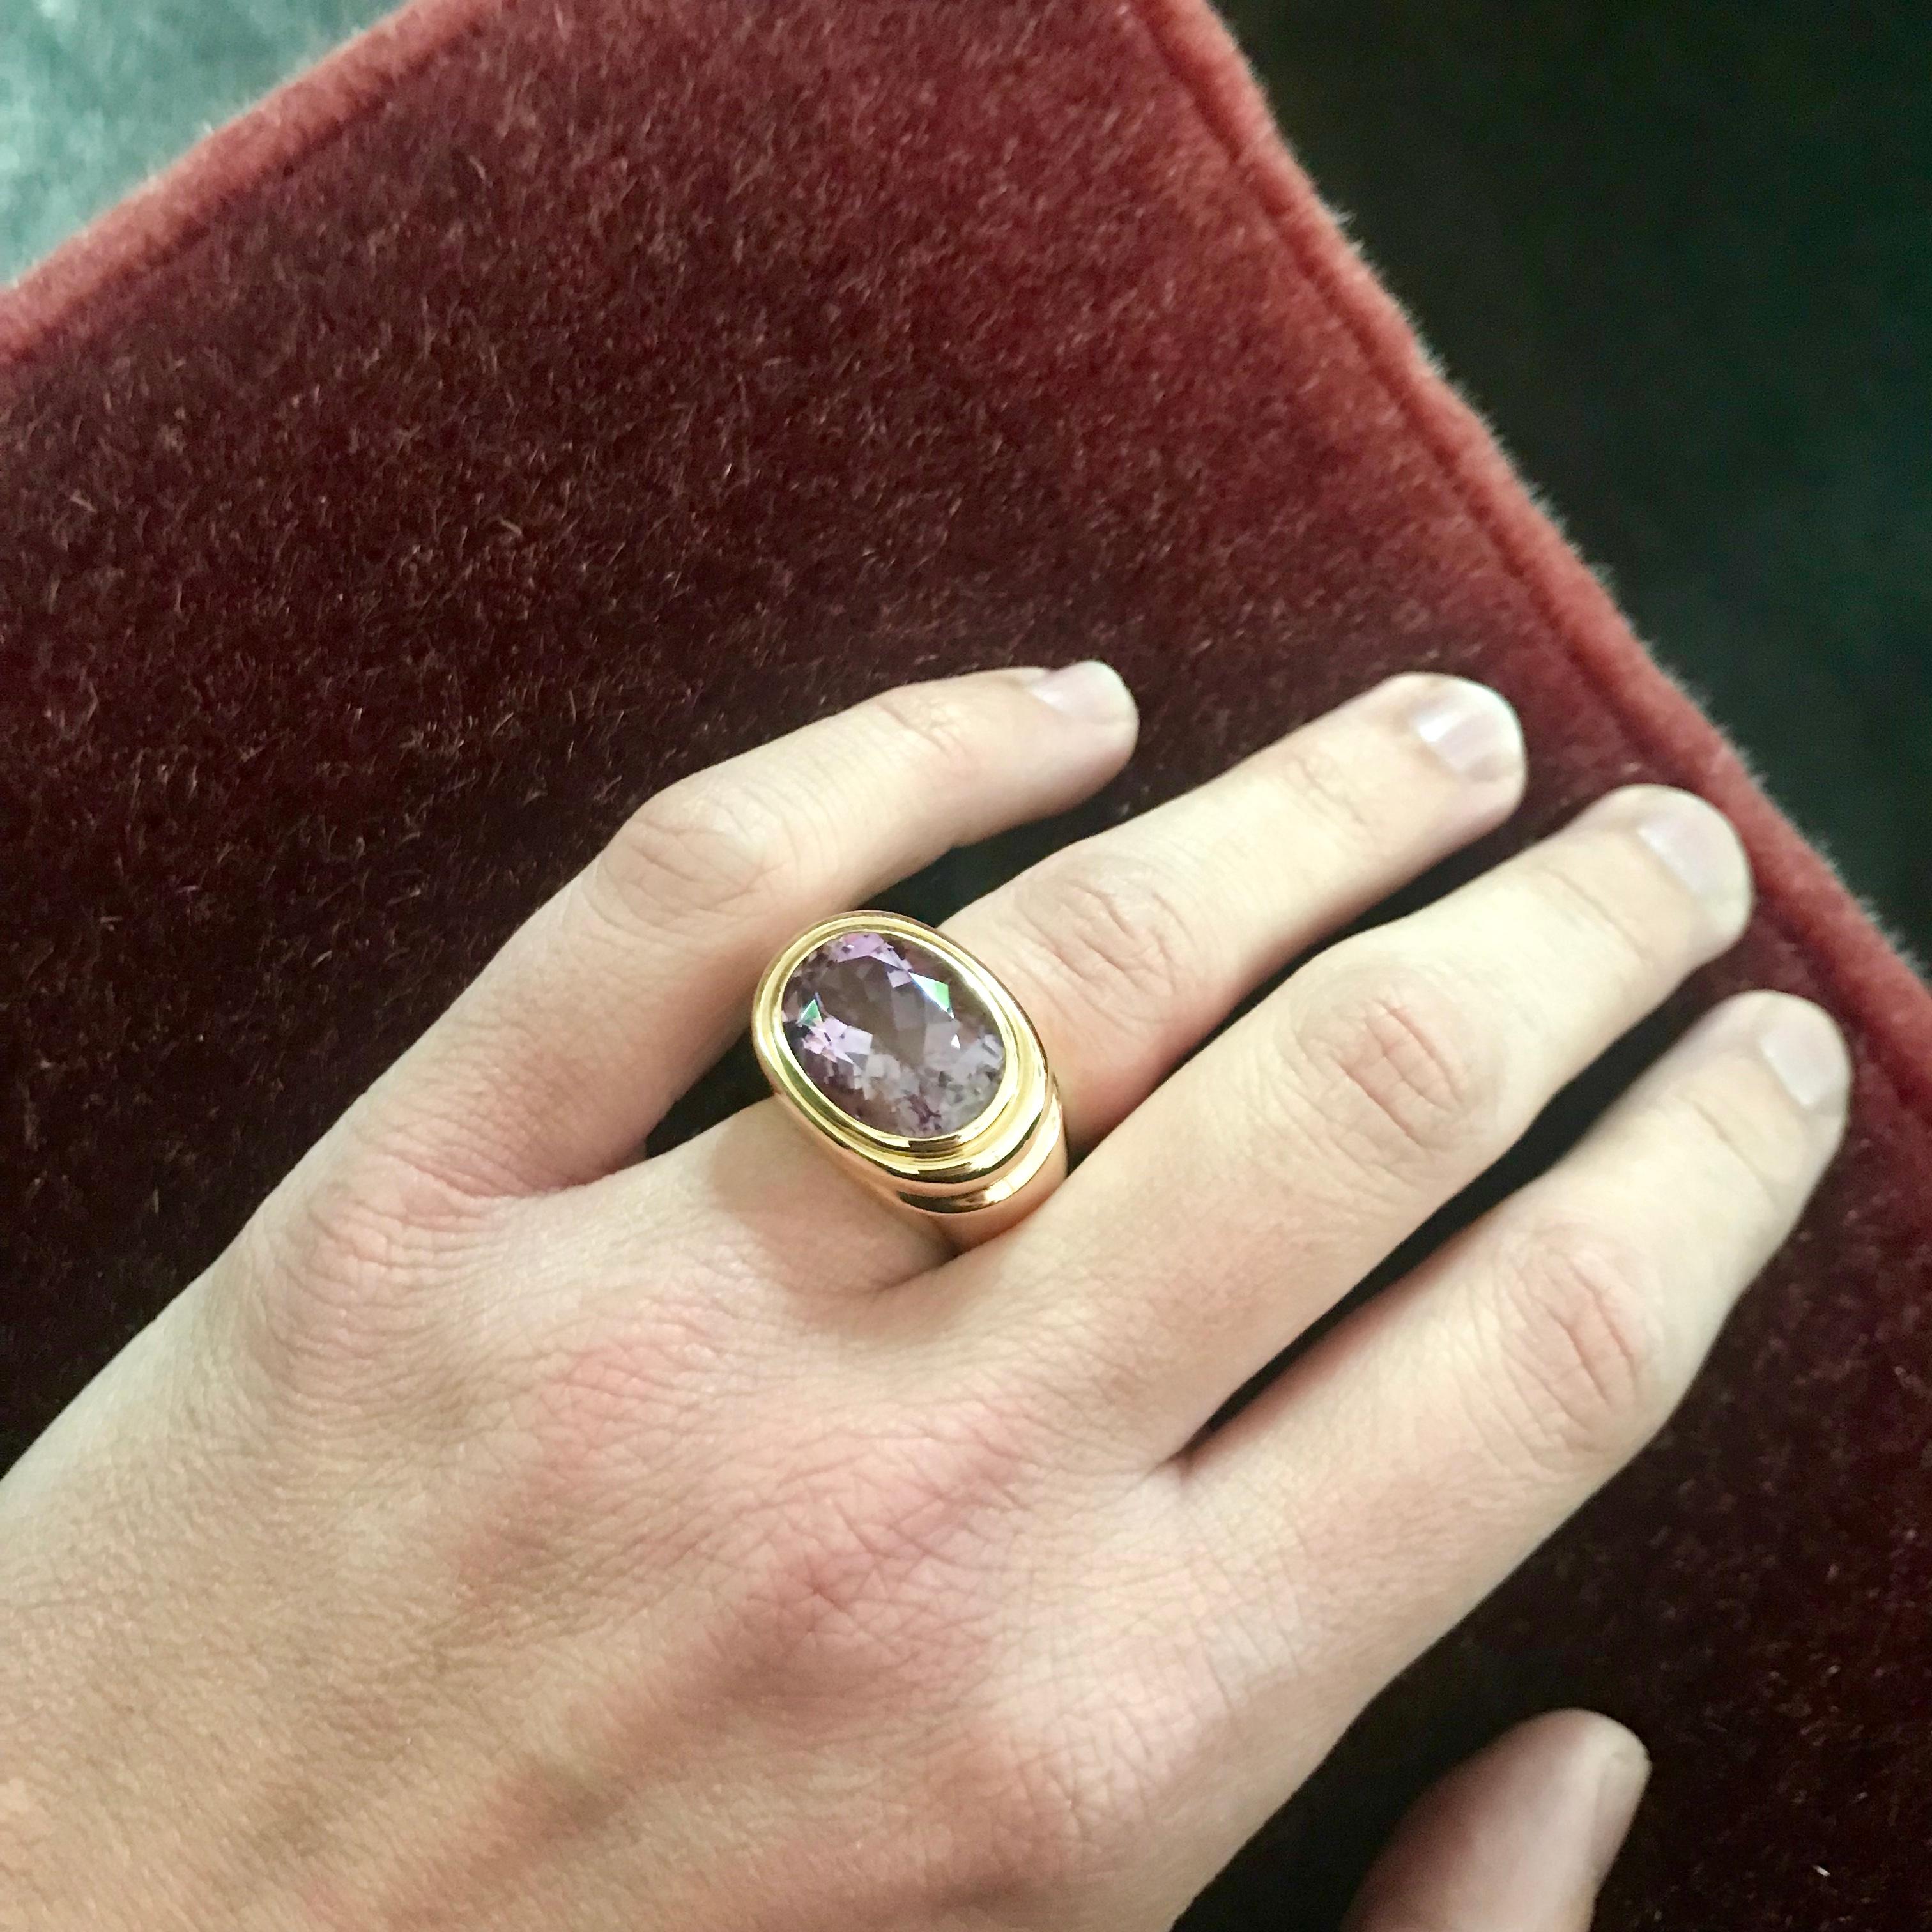 Precious Basics Ring in 18 Carat Rose Gold set with 1 Amethyst of 12.24 ct

Size 55 (7.2/7 US)